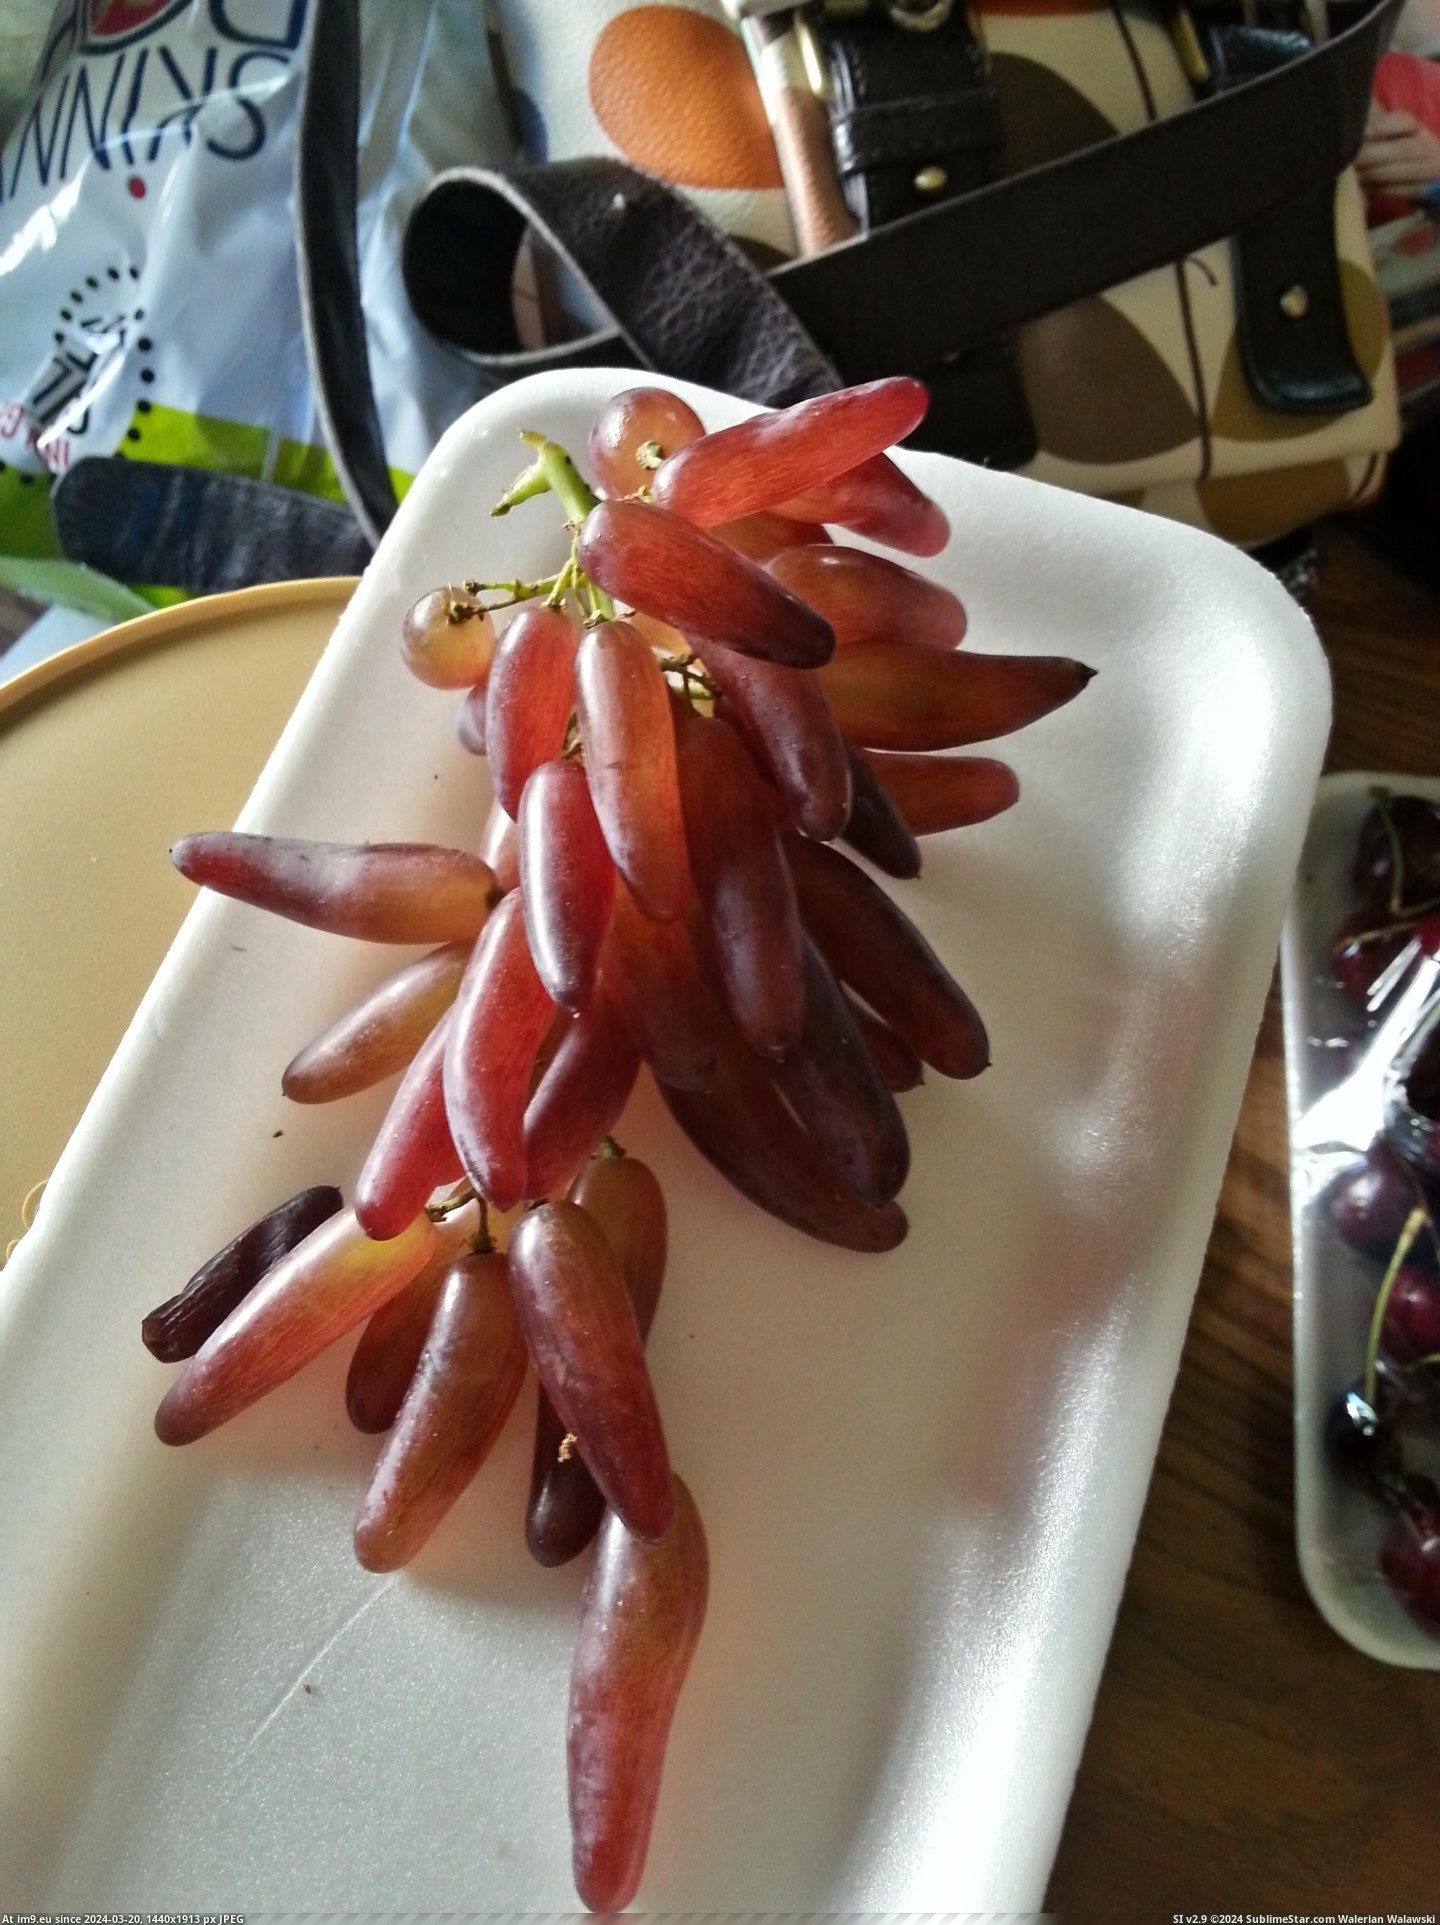 #Shaped #Fingers #Chili #Peppers #Grapes #Witches [Mildlyinteresting] Grapes shaped like chili peppers. They're known as Witches Fingers. Pic. (Image of album My r/MILDLYINTERESTING favs))